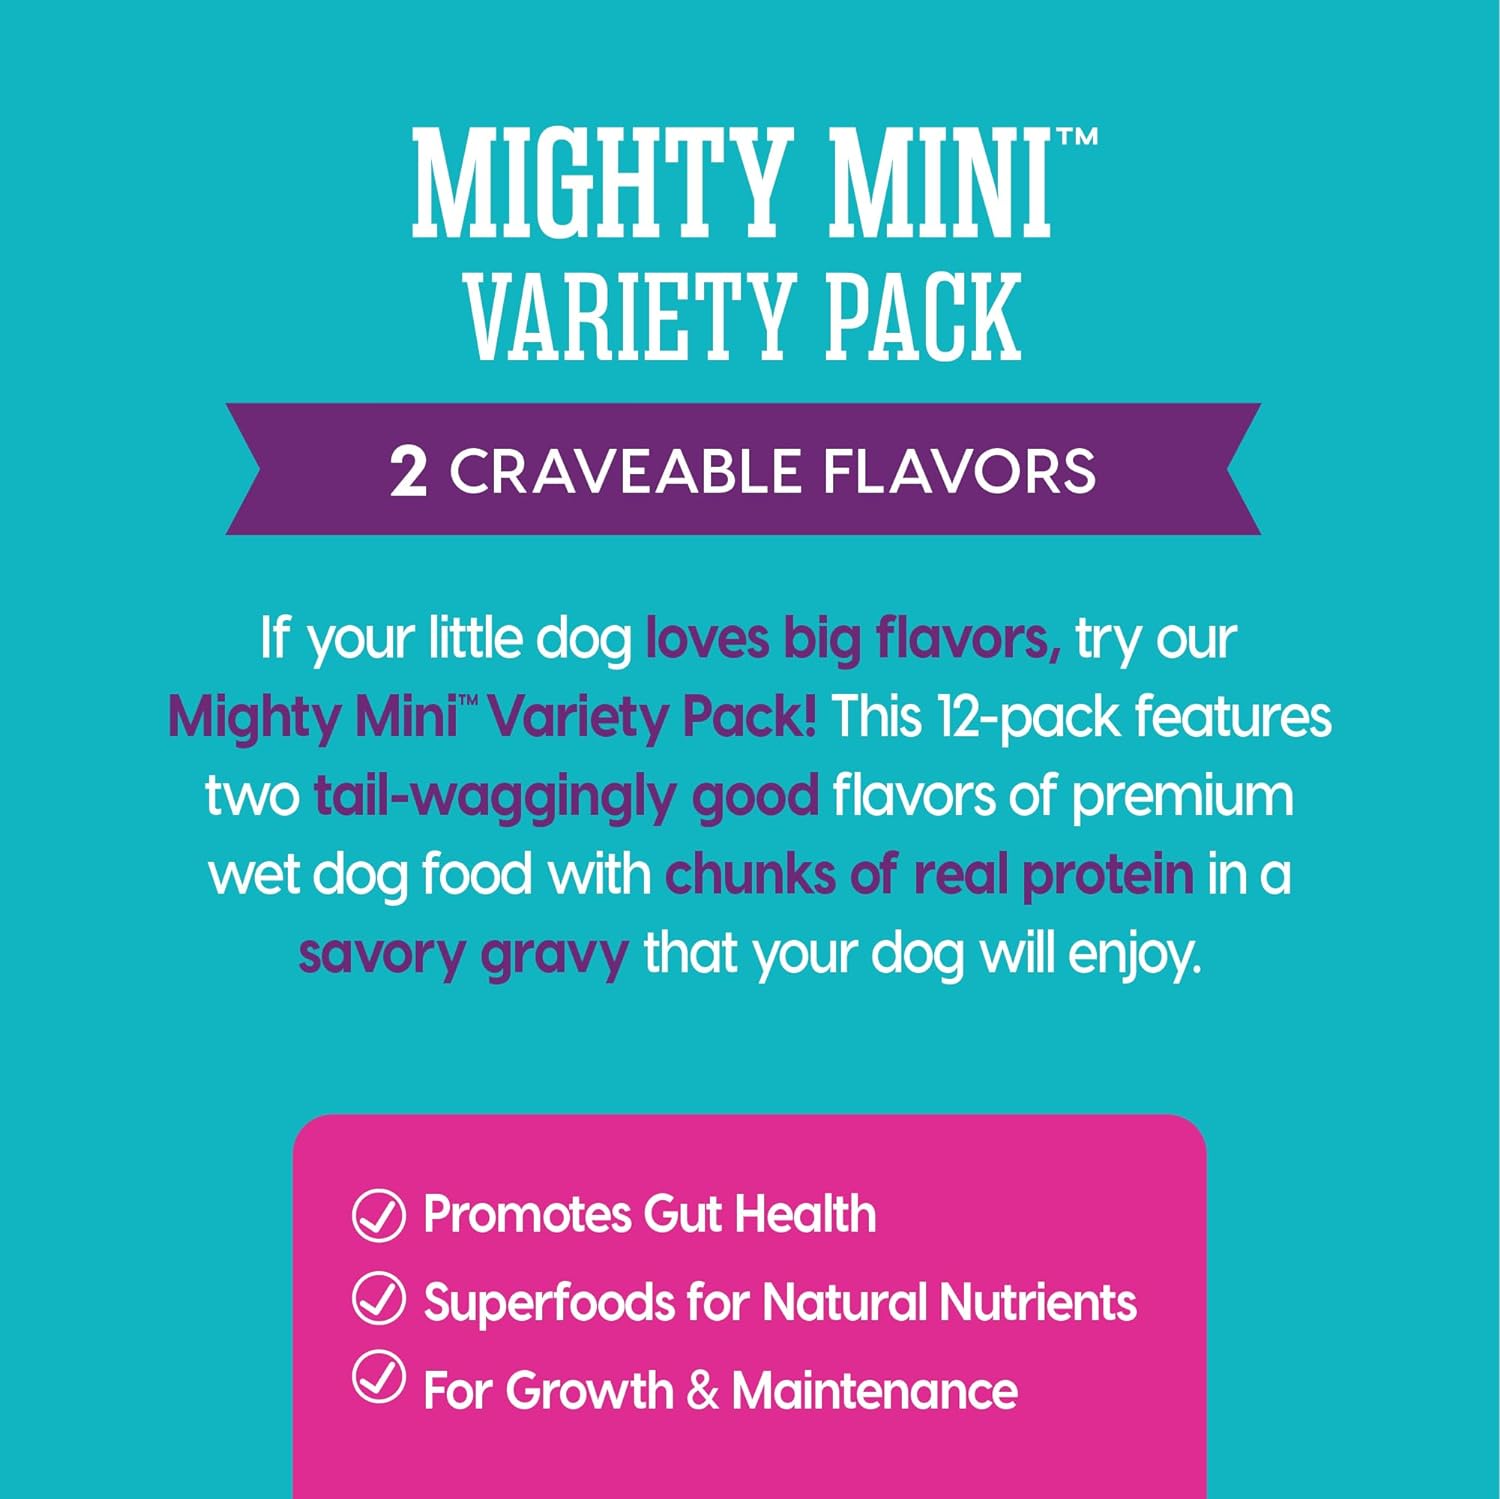 Solid Gold Wet Dog Food Variety Pack for Small Dogs - Mighty Mini Grain Free Wet Dog Food Made with Real Protein - for Puppies, Adult & Senior Small Breeds with Sensitive Stomachs - 12 Pack: Pet Supplies: Amazon.com